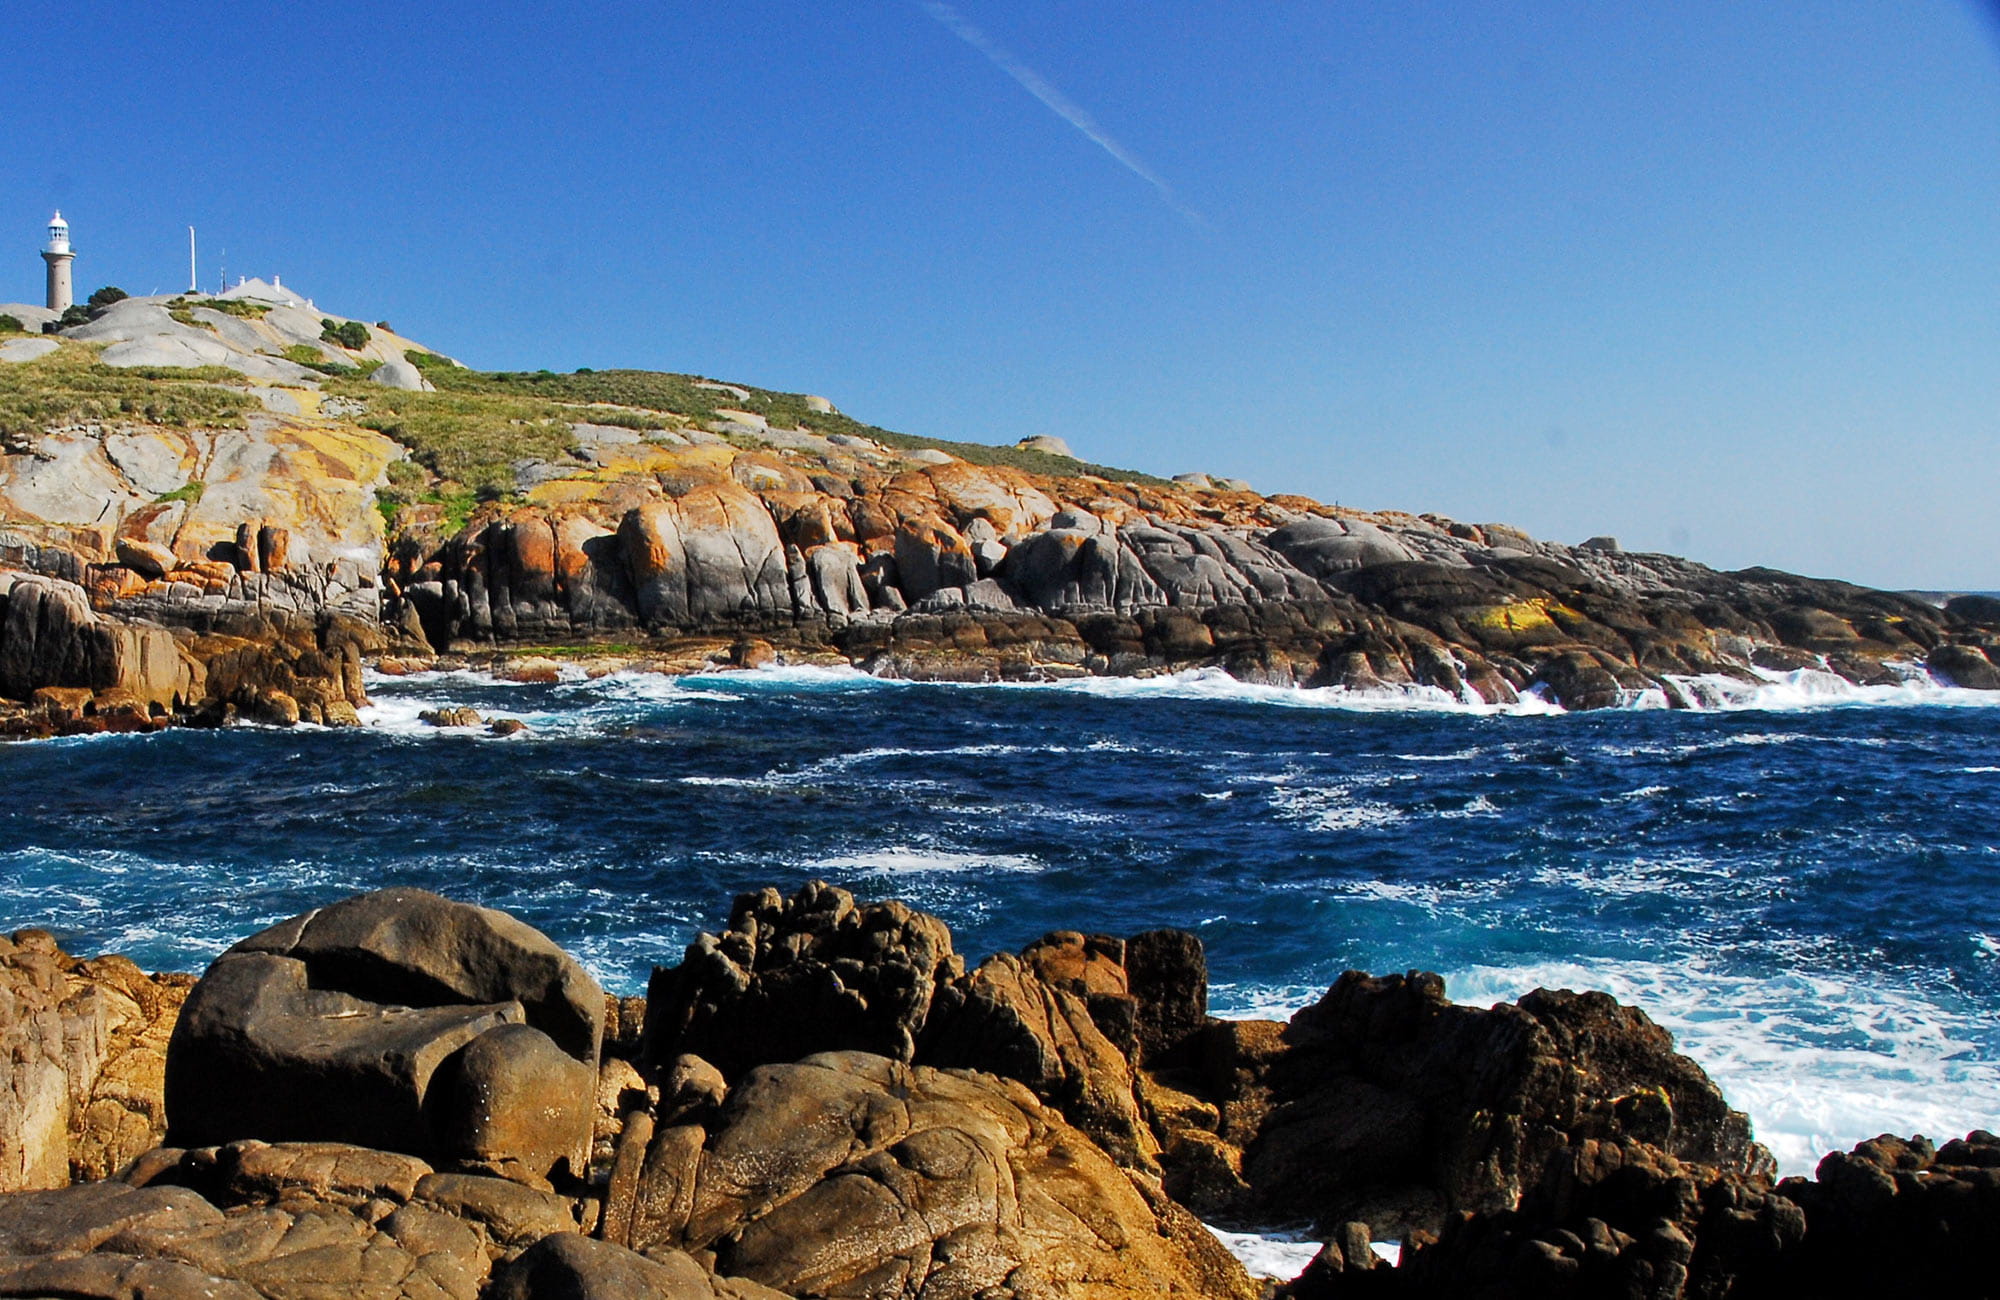 View of Montague Island lighthouse from rocky coastline. Photo: Stuart Cohen/OEH